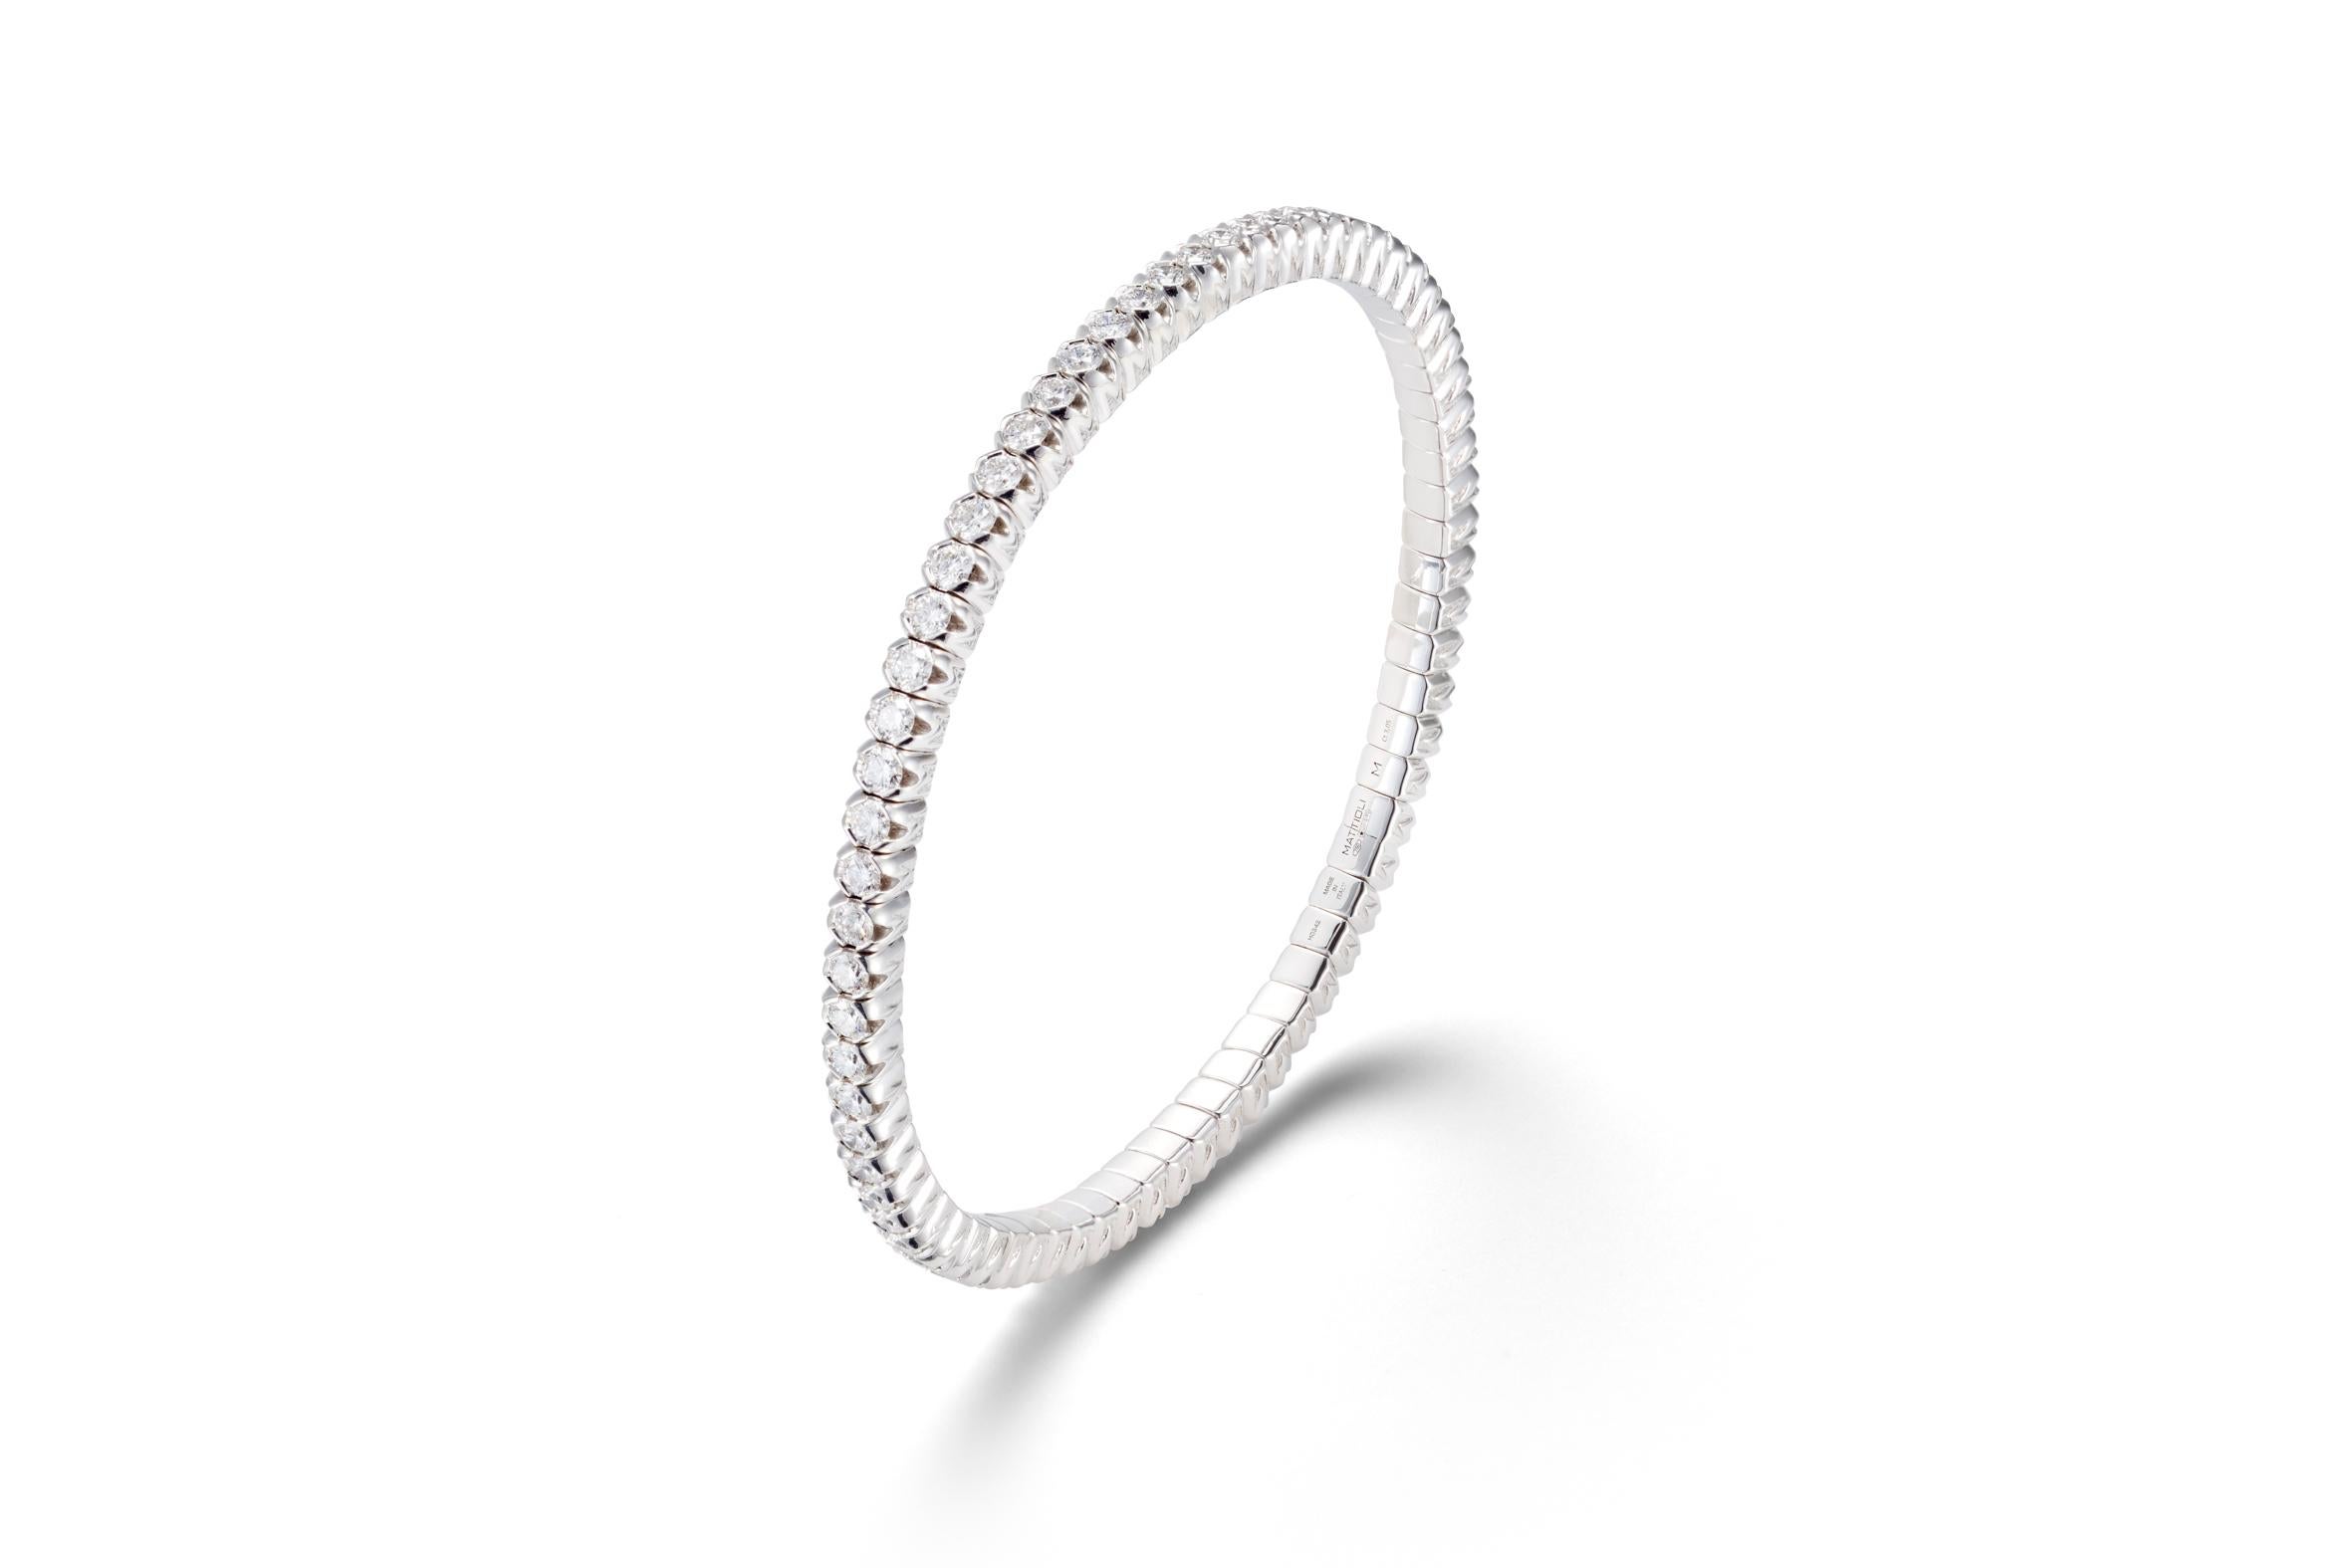 X- BAN
The timeless eternity ring reinterpreted by Mattioli is modern, unique and comfortable and can be perfectly adapted to every woman’s hand. The unique inner expandable mechanism gives the X-Band collection a soft and tailored structure for